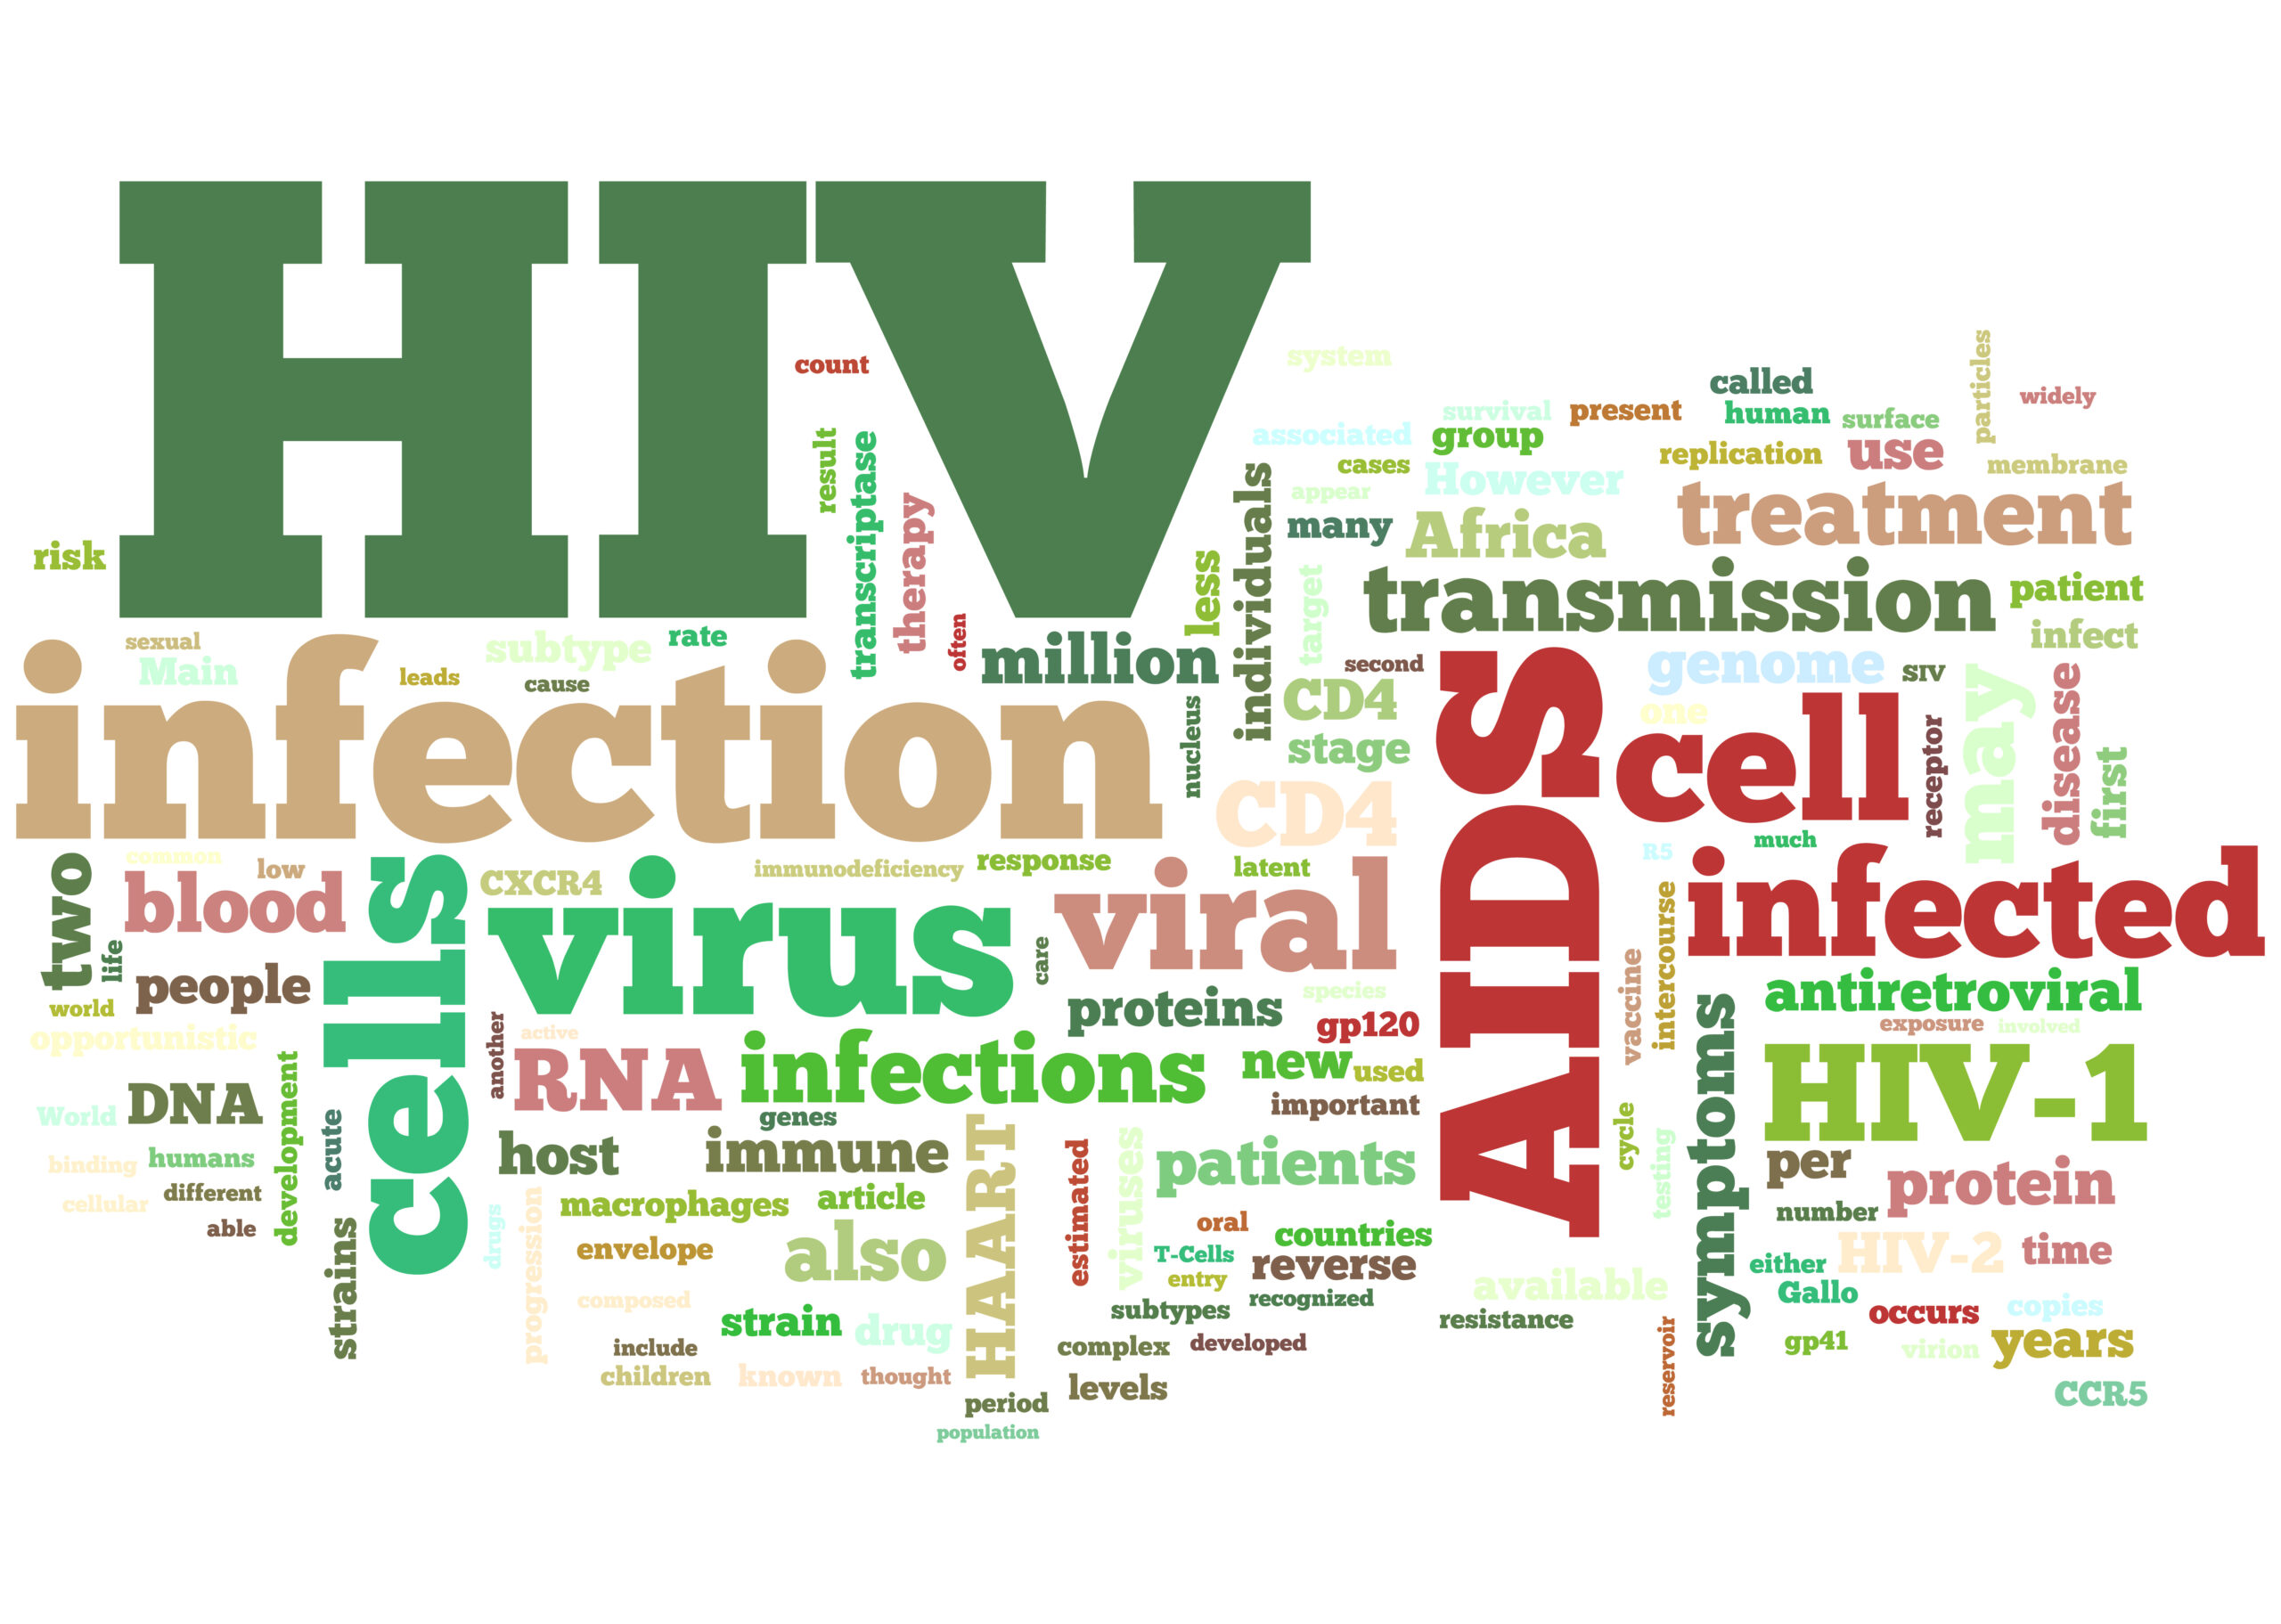 Antibodies Protecting Against HIV-1 Infection